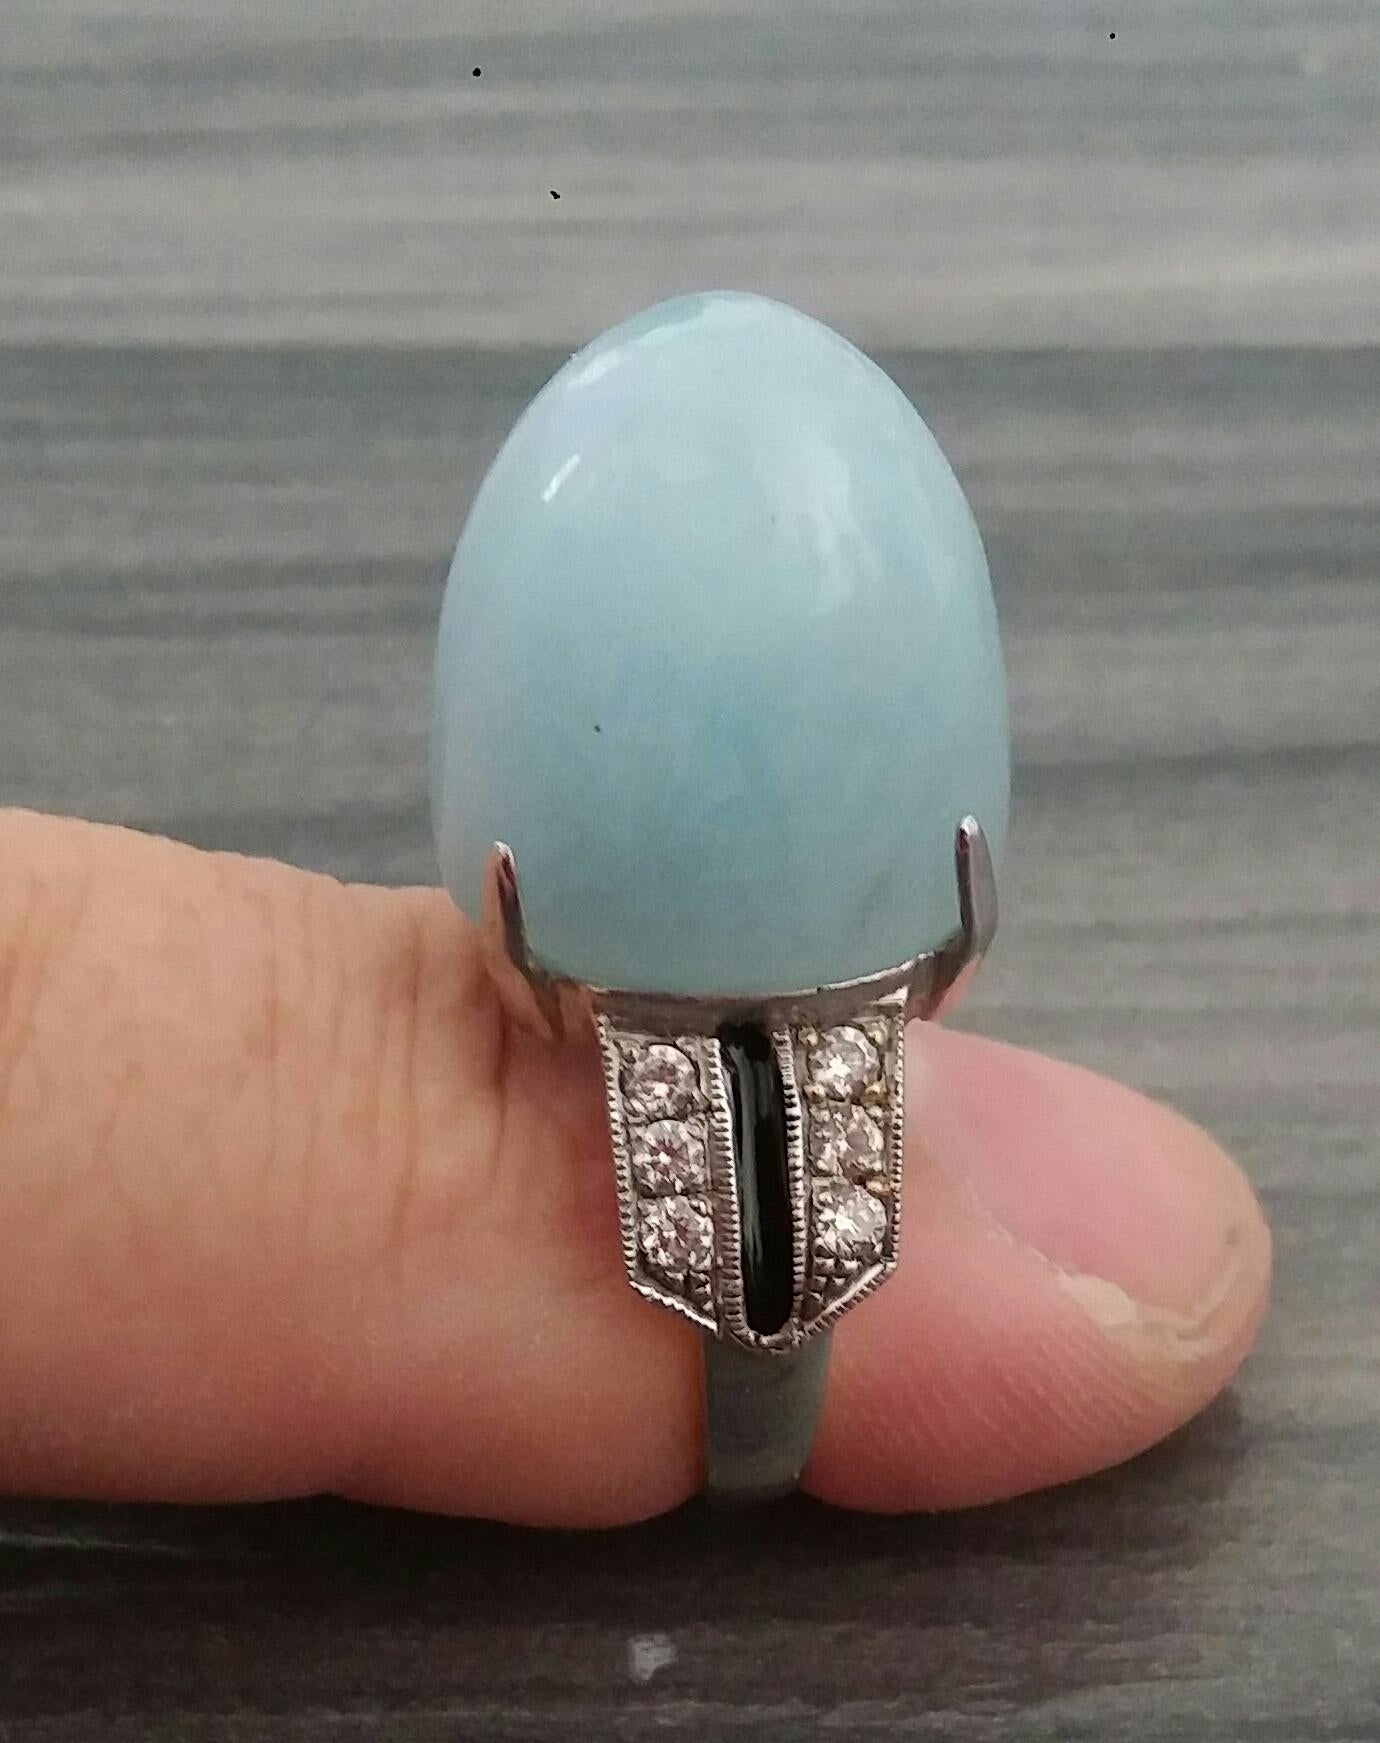 28 Carat Sugar Loaf Aquamarine cab ( 16,5 mm. x 13 mm.x17 mm.) ,12 round full cut diamonds of 0,05 ct. each,for total diamonds weight of 0,6 carat.4.7 grams of 14 kt. white gold,black enamel
Ring Shank Diameter  21 mm
Height 28 mm
Weight  9 grams
In